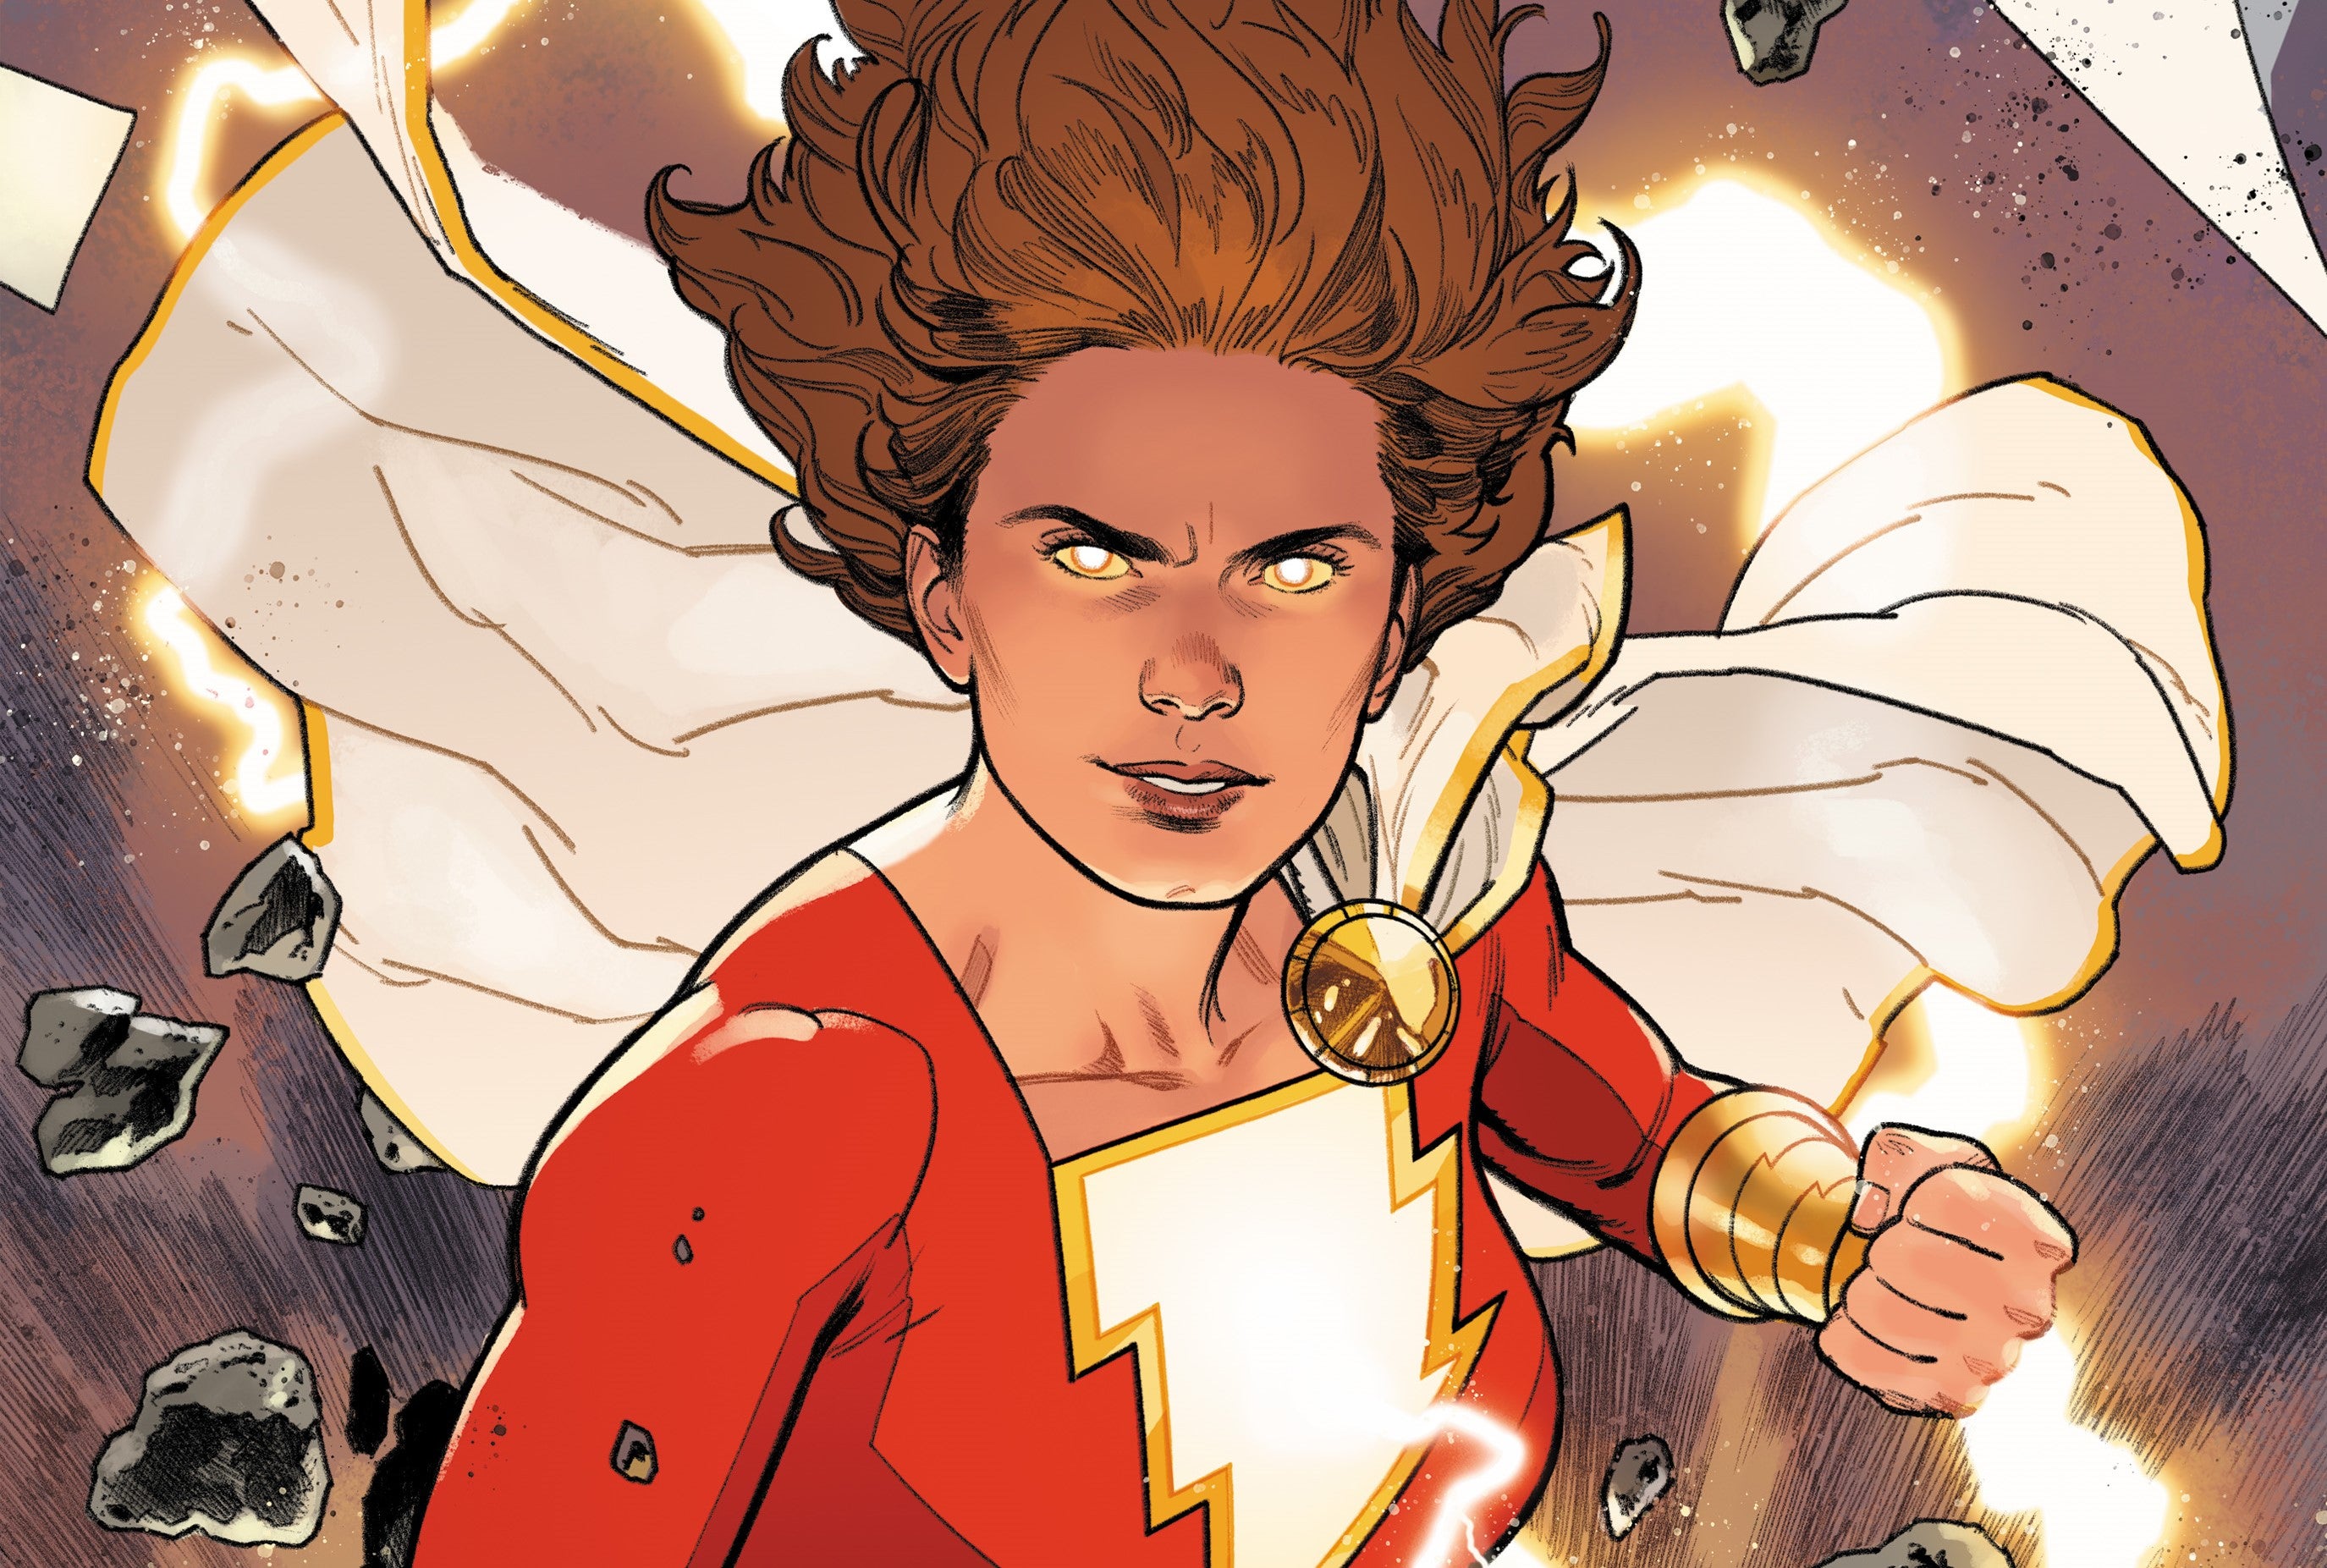 Cropped image of Mary Marvel surrounded by lightning in a fight pose